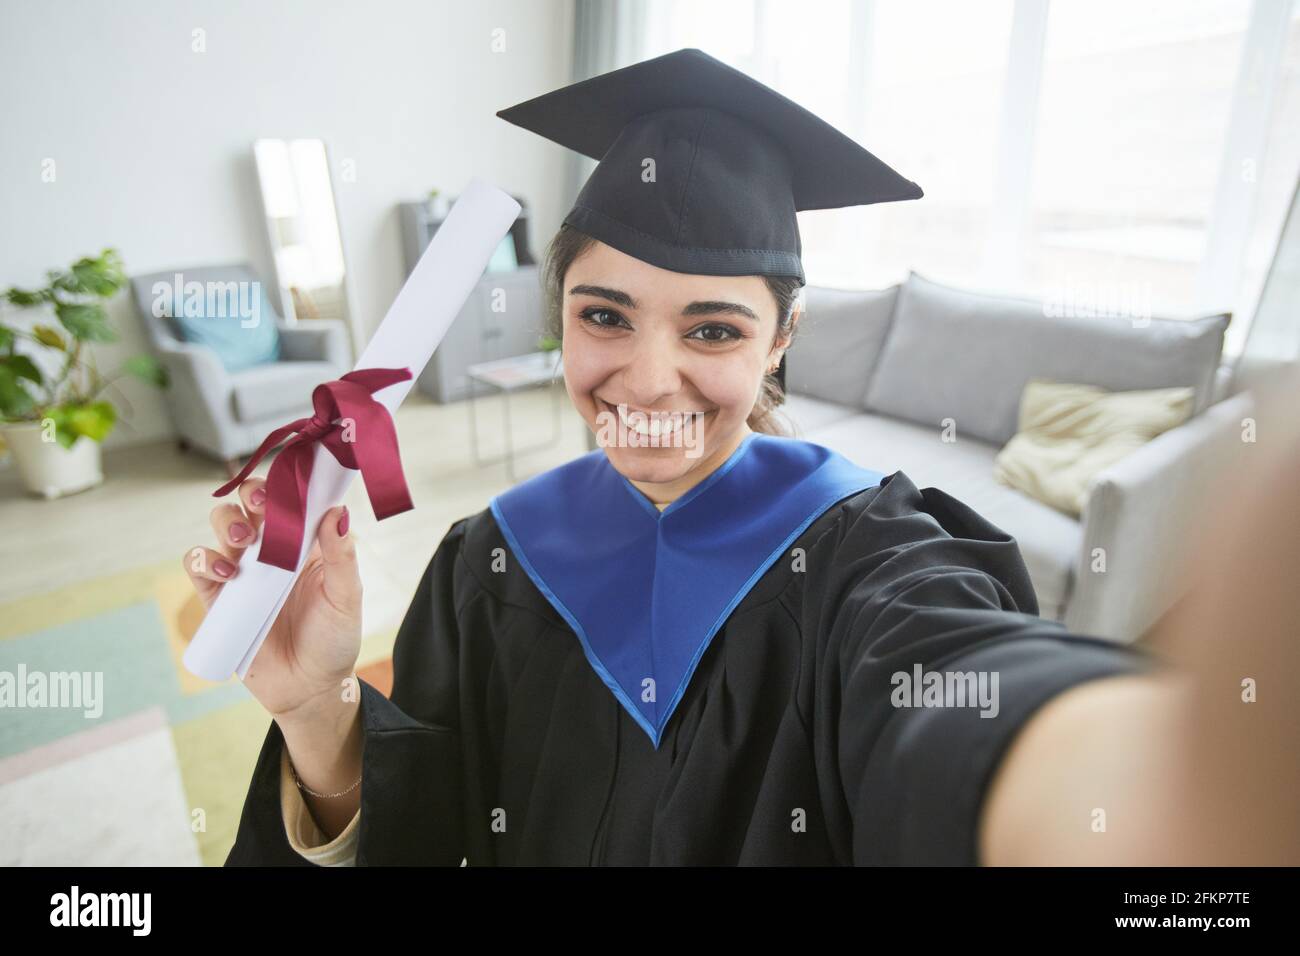 Smiling young woman wearing graduation gown while taking selfie at home or video blogging Stock Photo